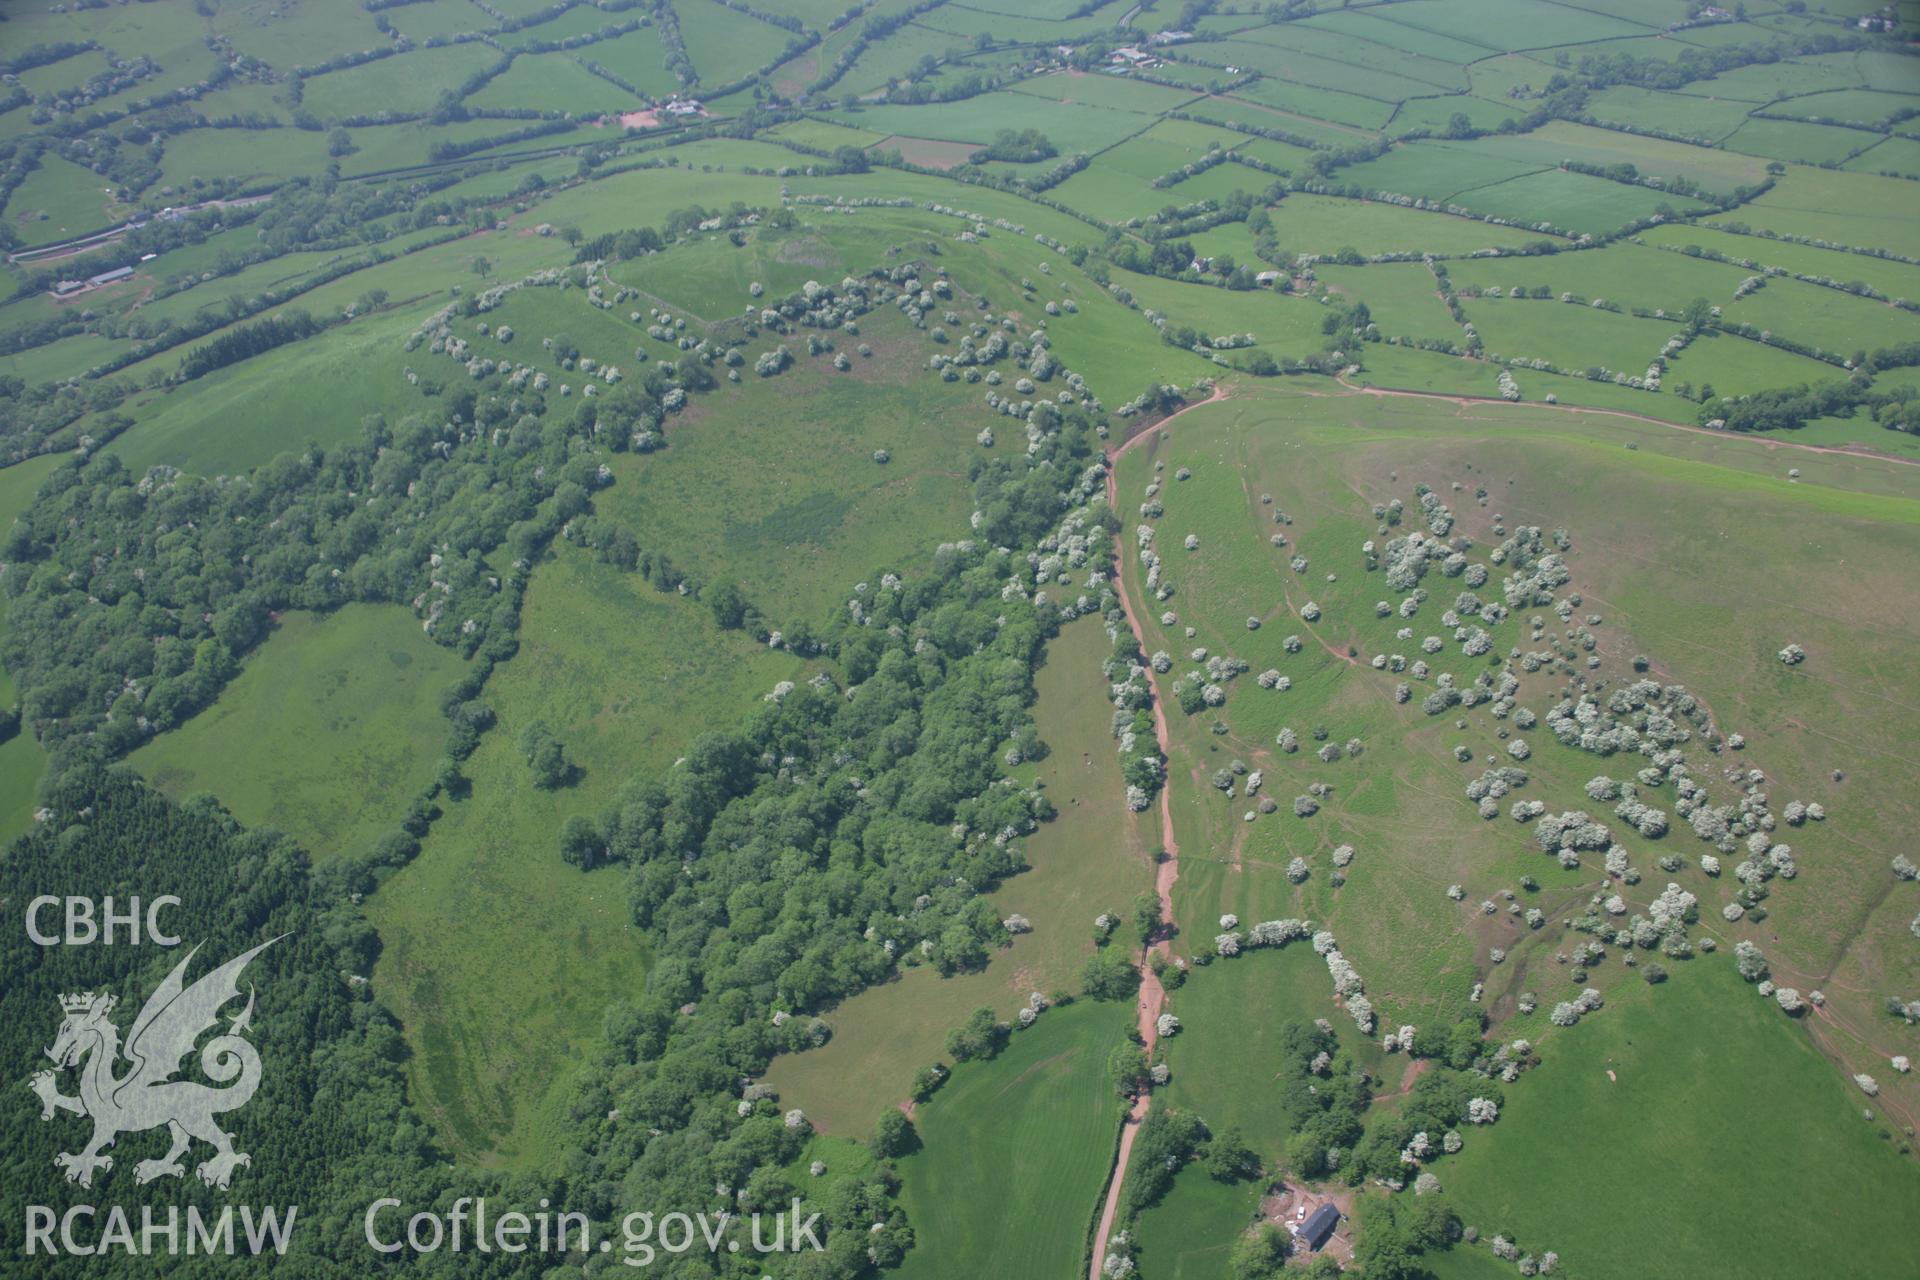 RCAHMW colour oblique aerial photograph of Castell Dinas from the north-east. Taken on 09 June 2006 by Toby Driver.